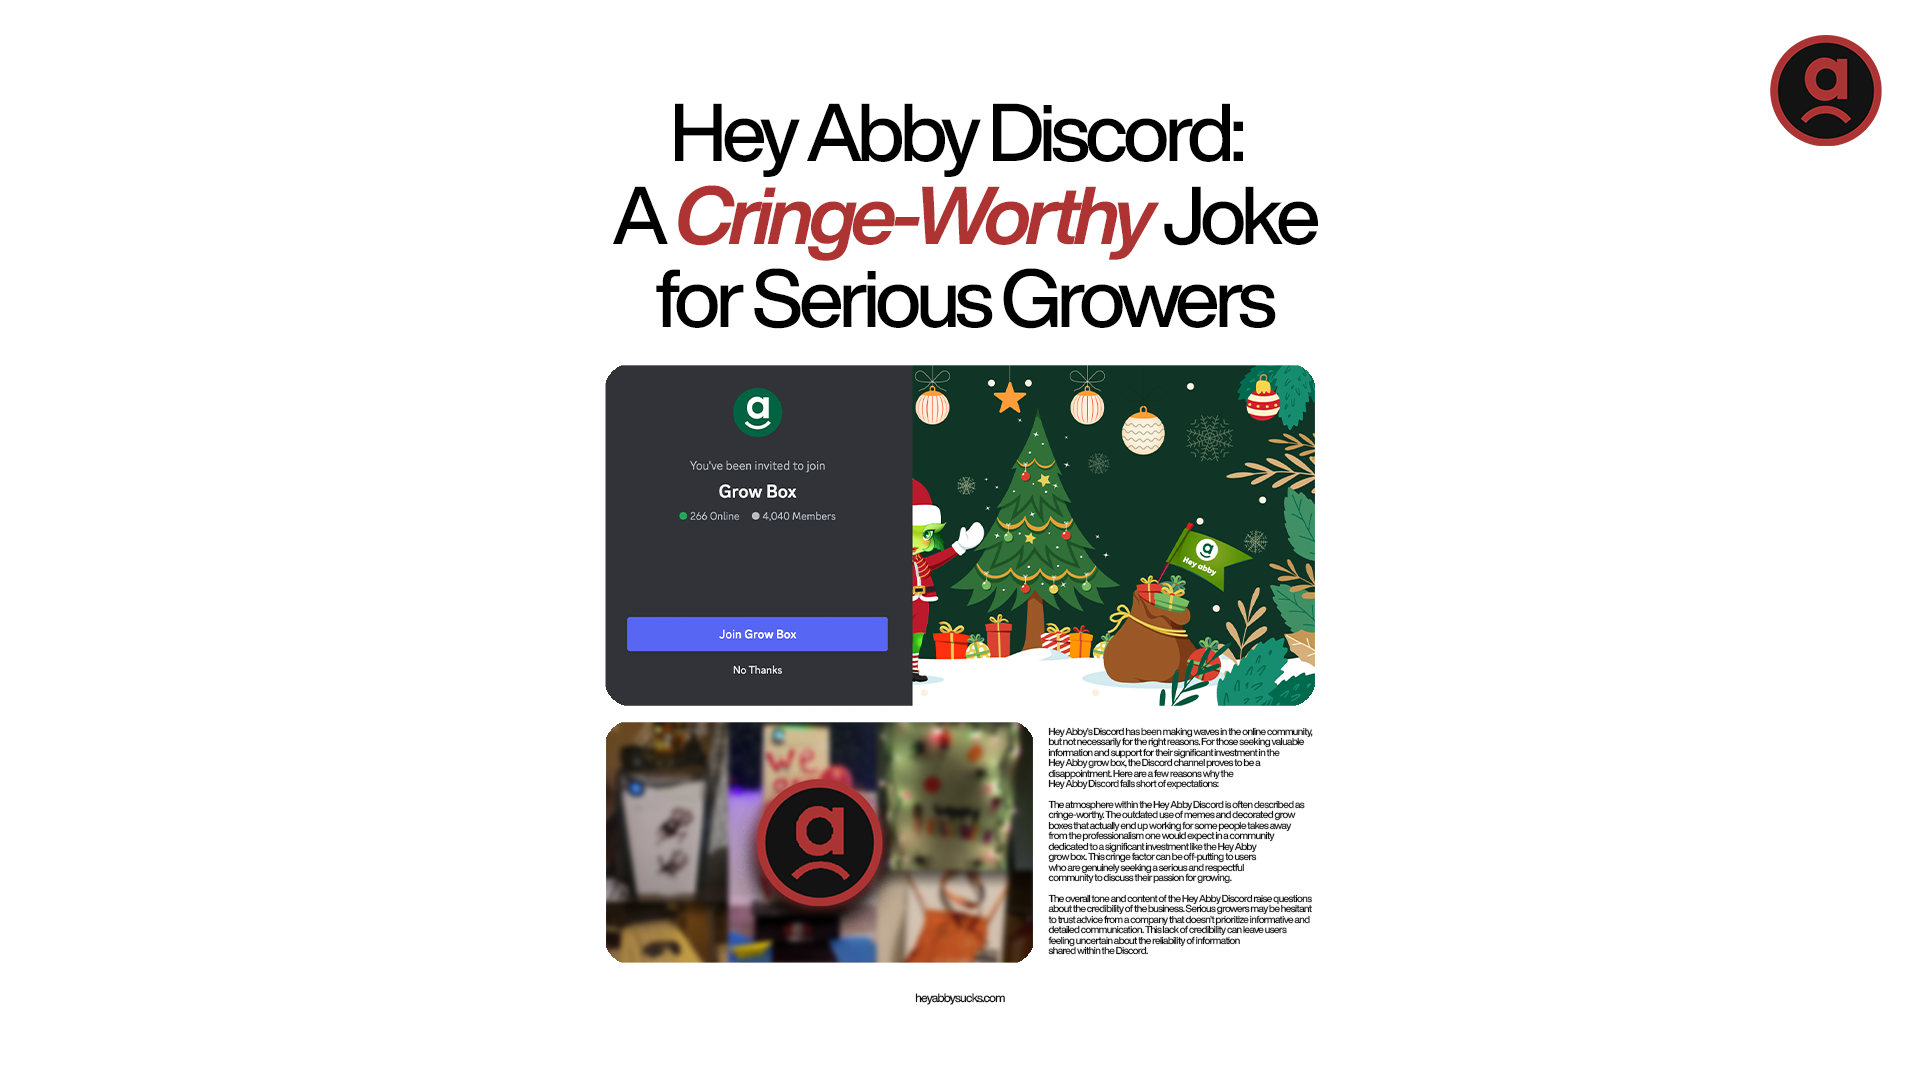 Hey Abby Discord: A Cringe-Worthy Joke for Serious Growers